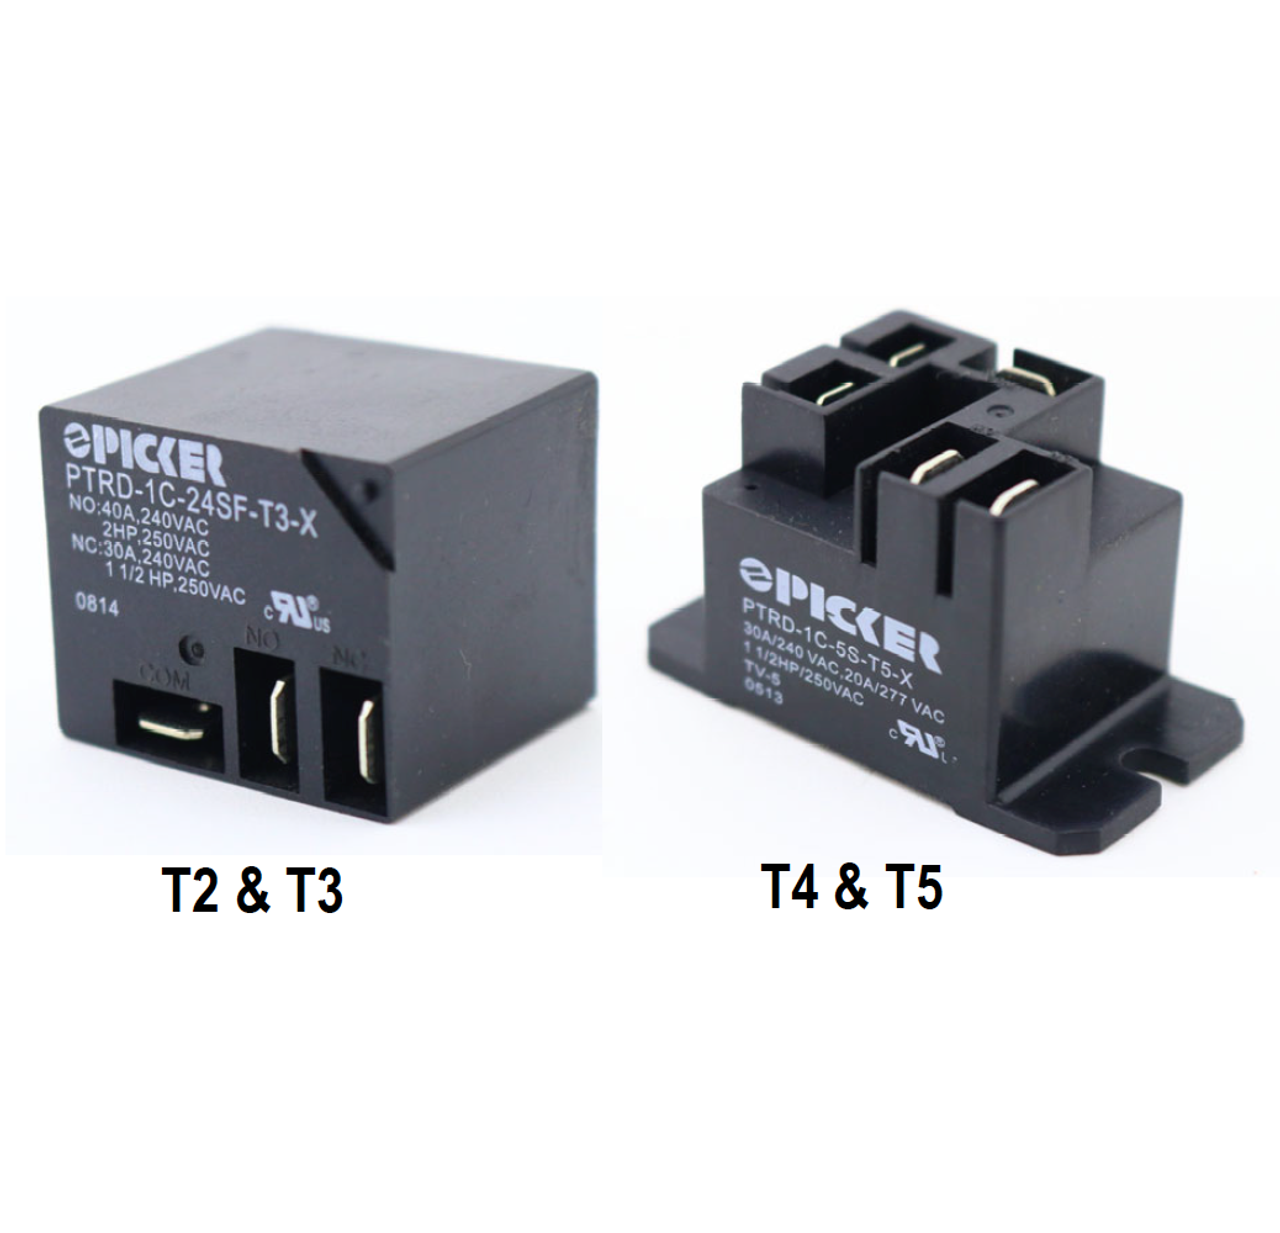 Picker PTRD-1A-24S-T2-X-A0.6G Power Relays